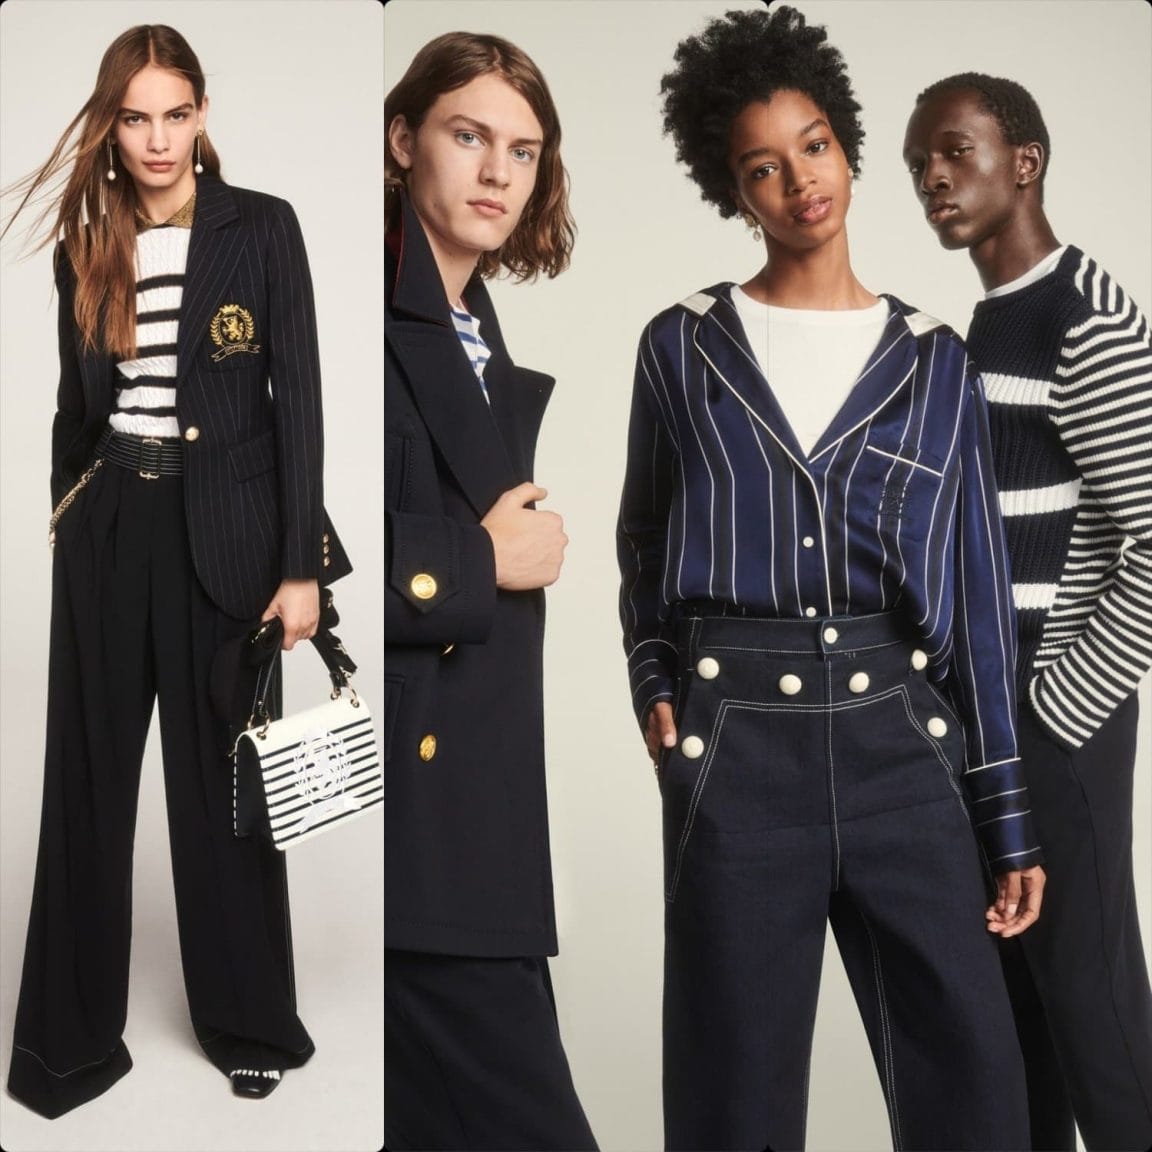 Tommy Hilfiger Cruise 2020 New York - RUNWAY MAGAZINE ® Collections